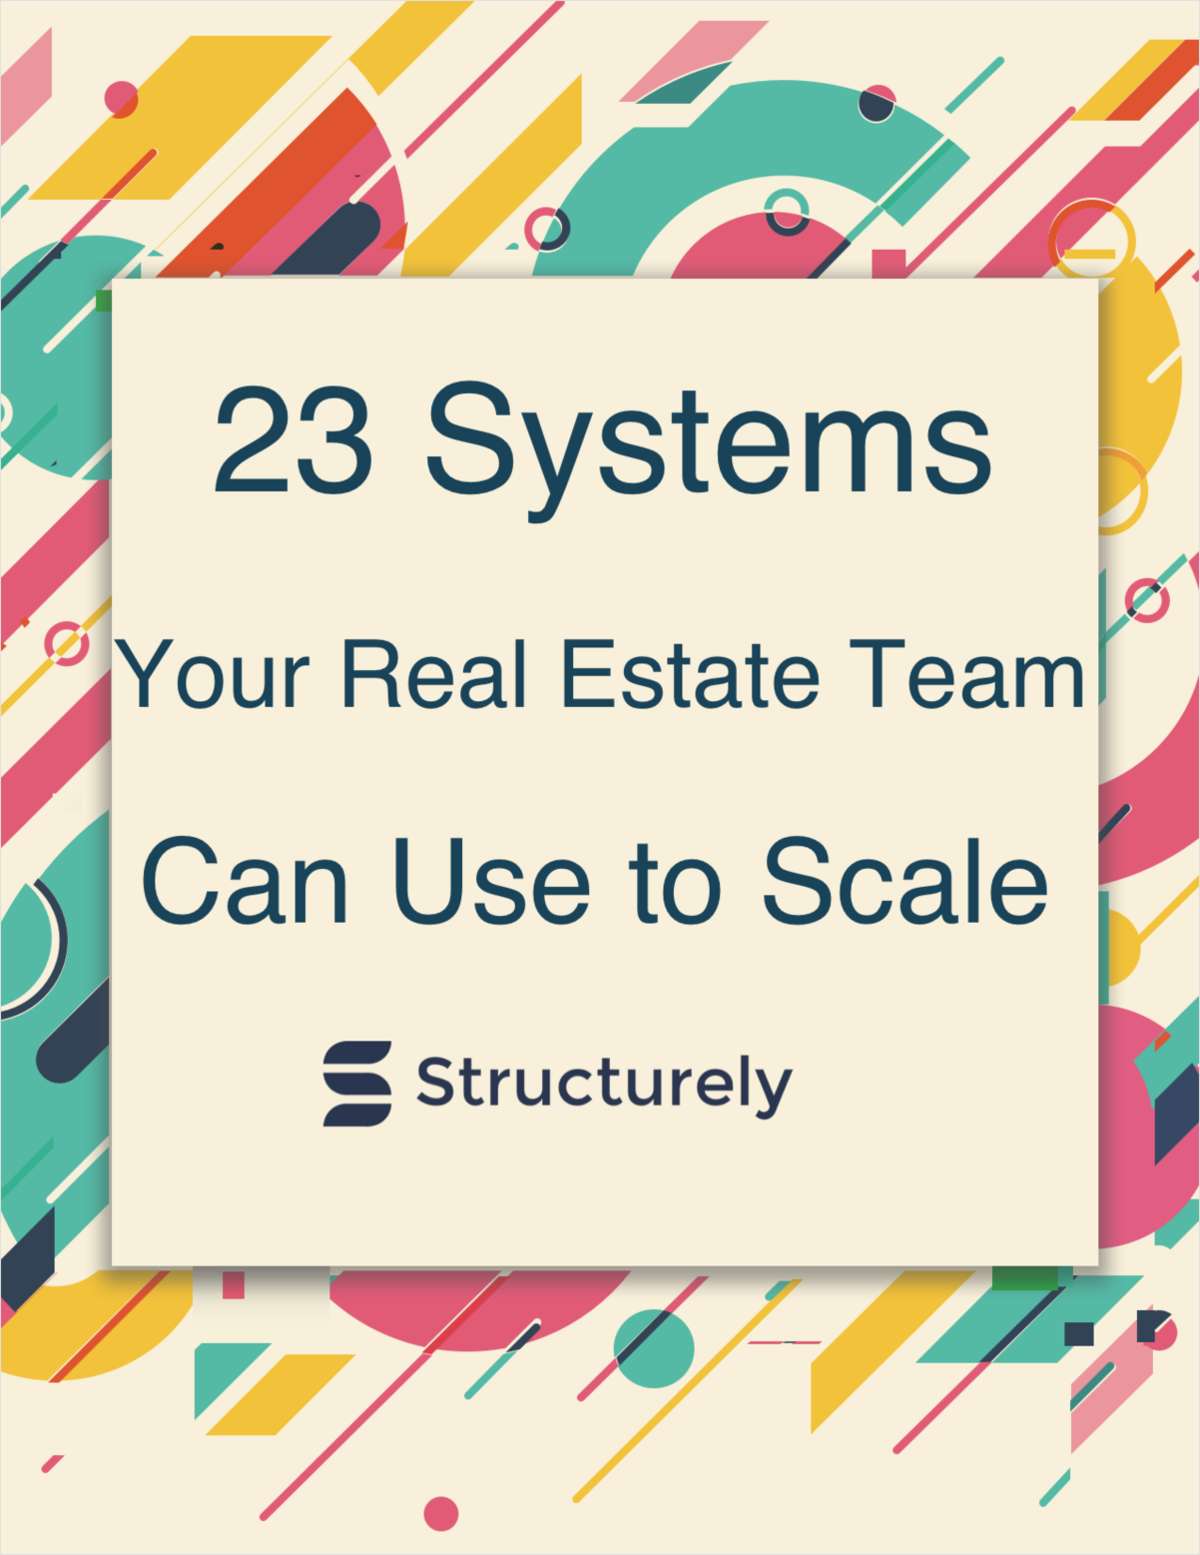 23 Systems Your Real Estate Team Can Use to Scale